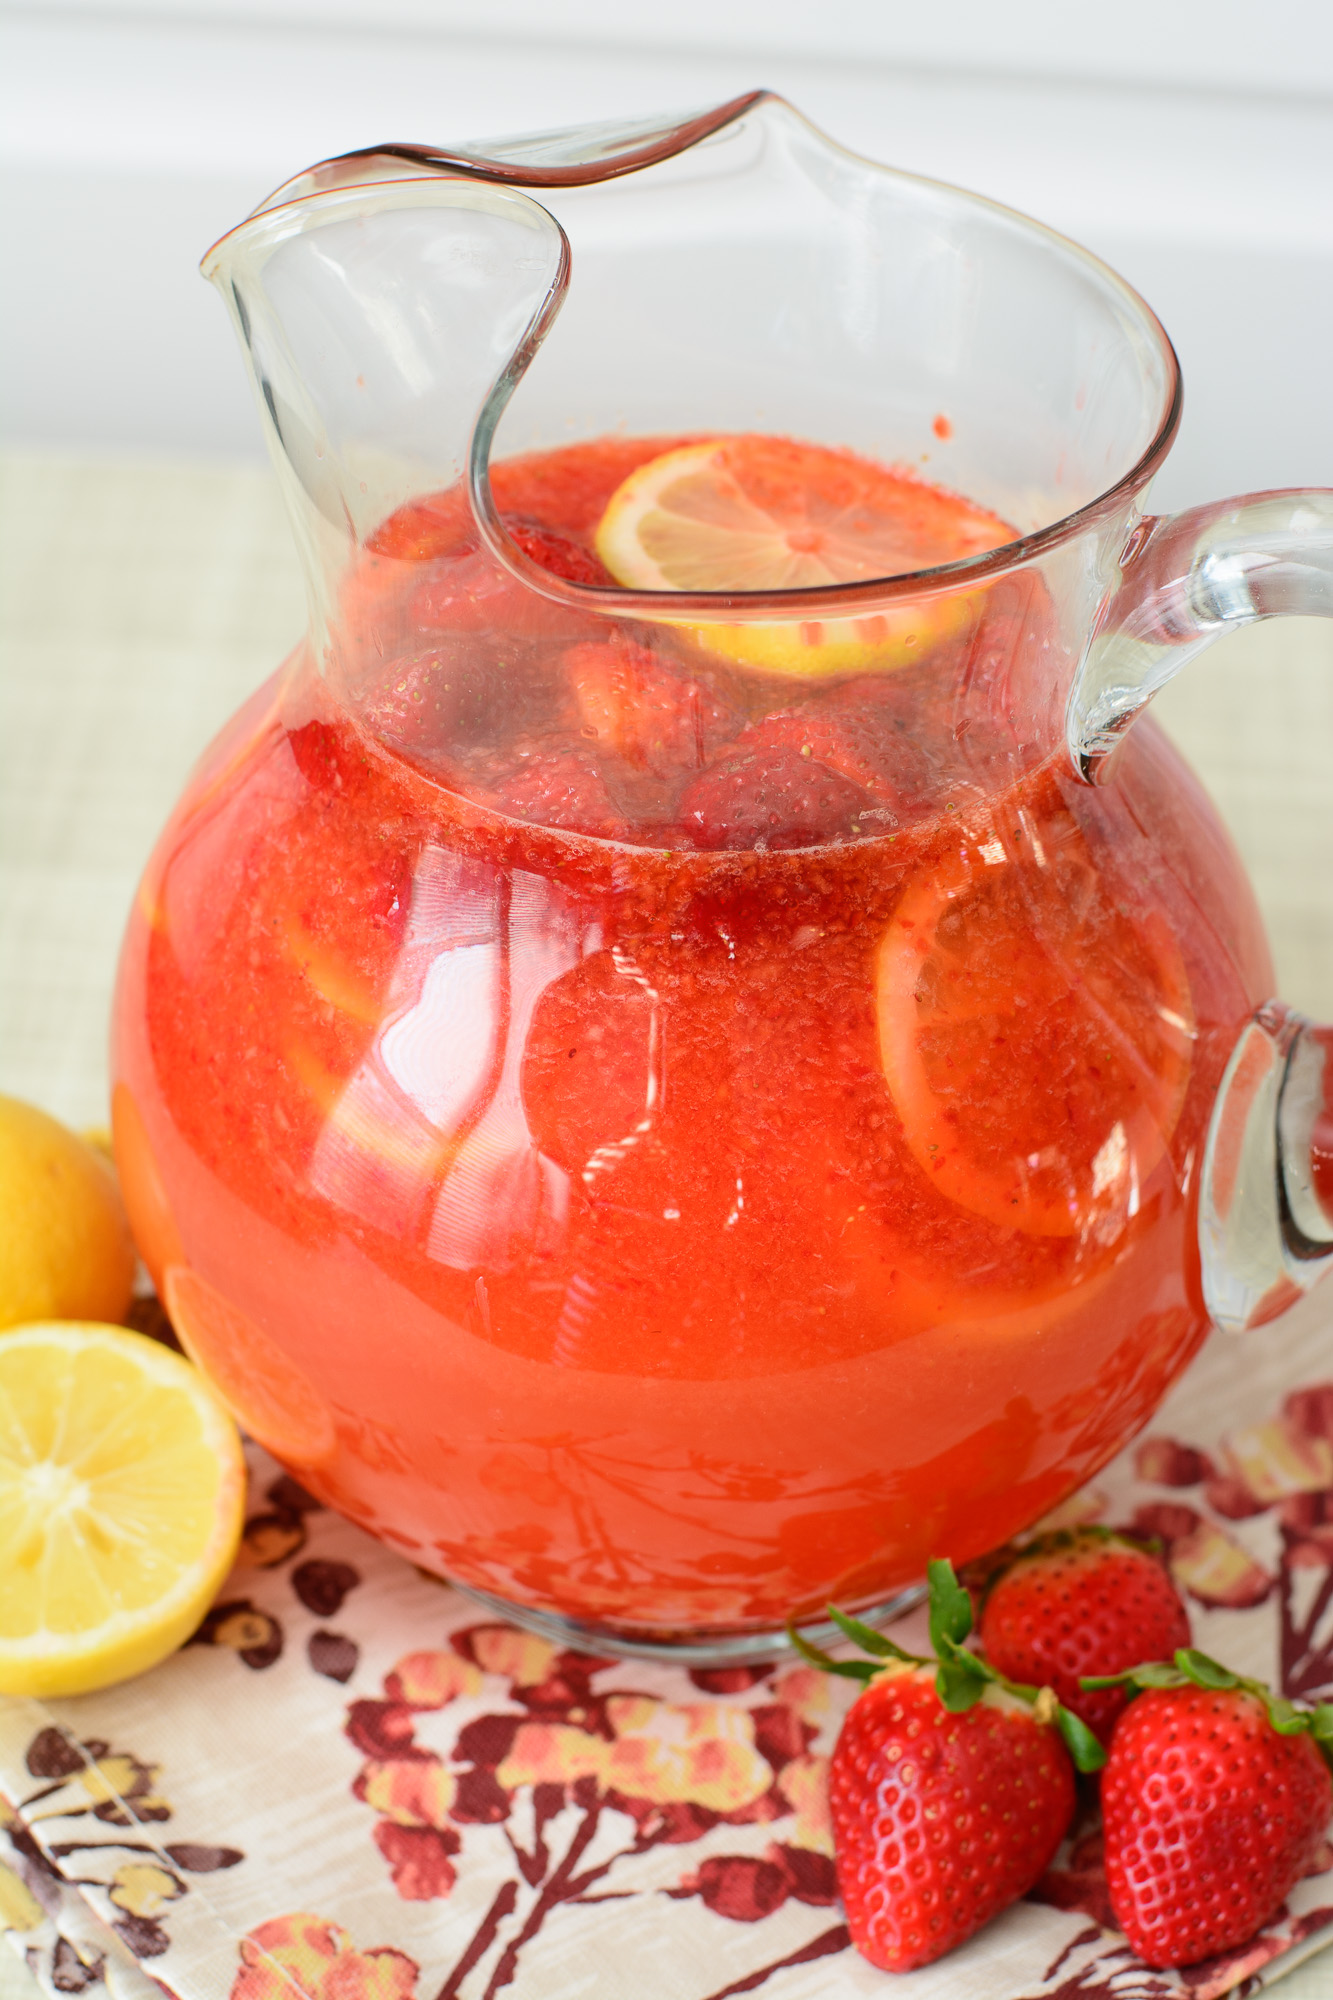 This Strawberry Lemonade recipe is wonderfully refreshing & sweet. Made from scratch with fresh lemon juice and strawberries, everyone is sure to love this recipe!